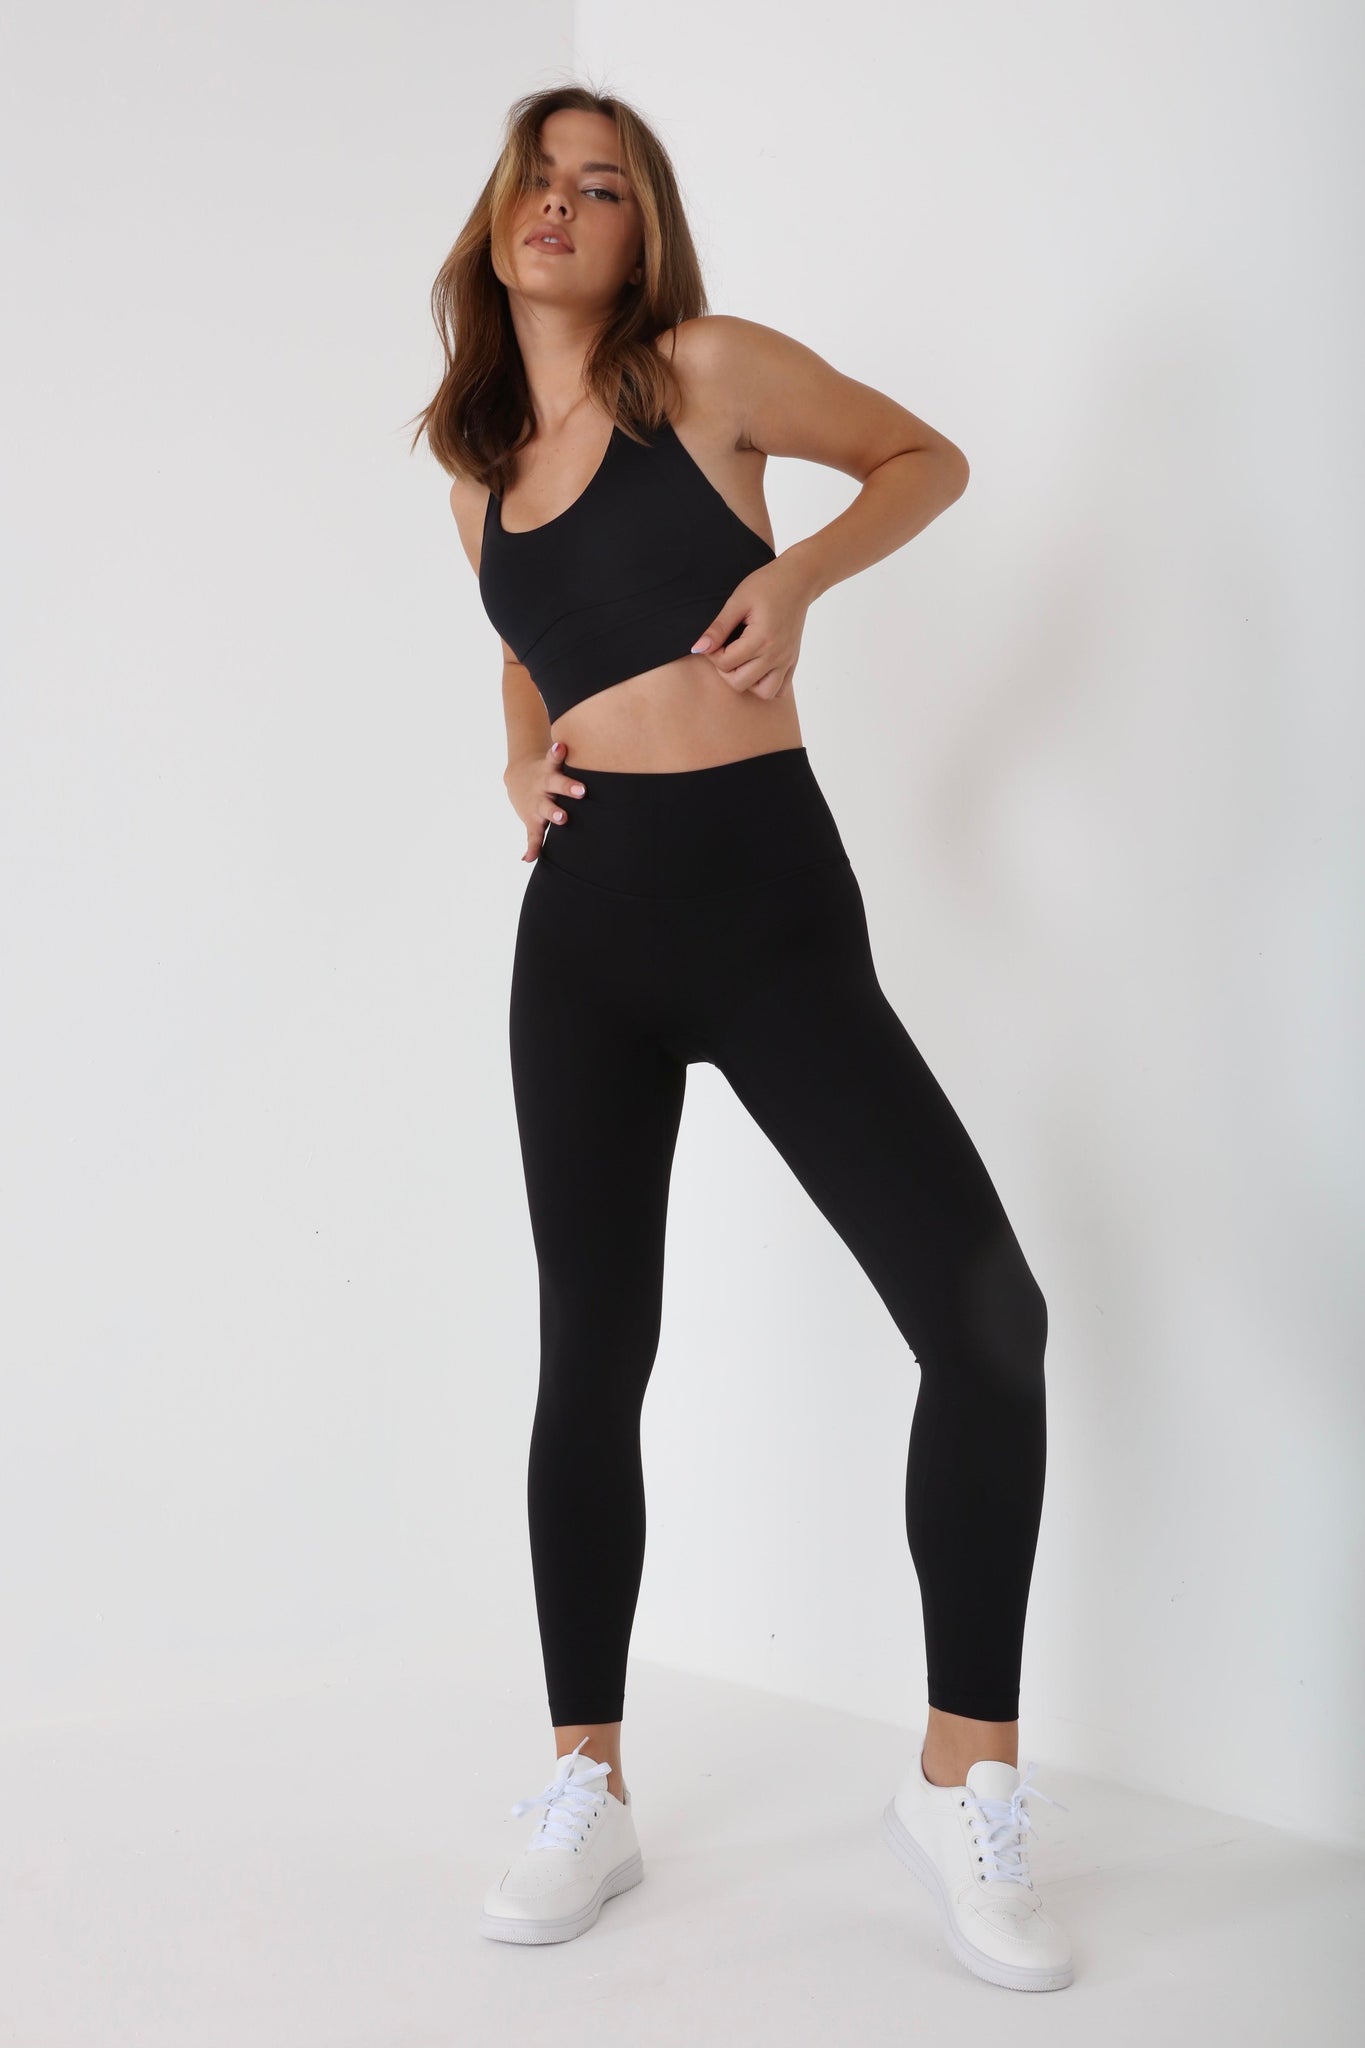 JUV fresh legging in black color with matching top, full body front view.